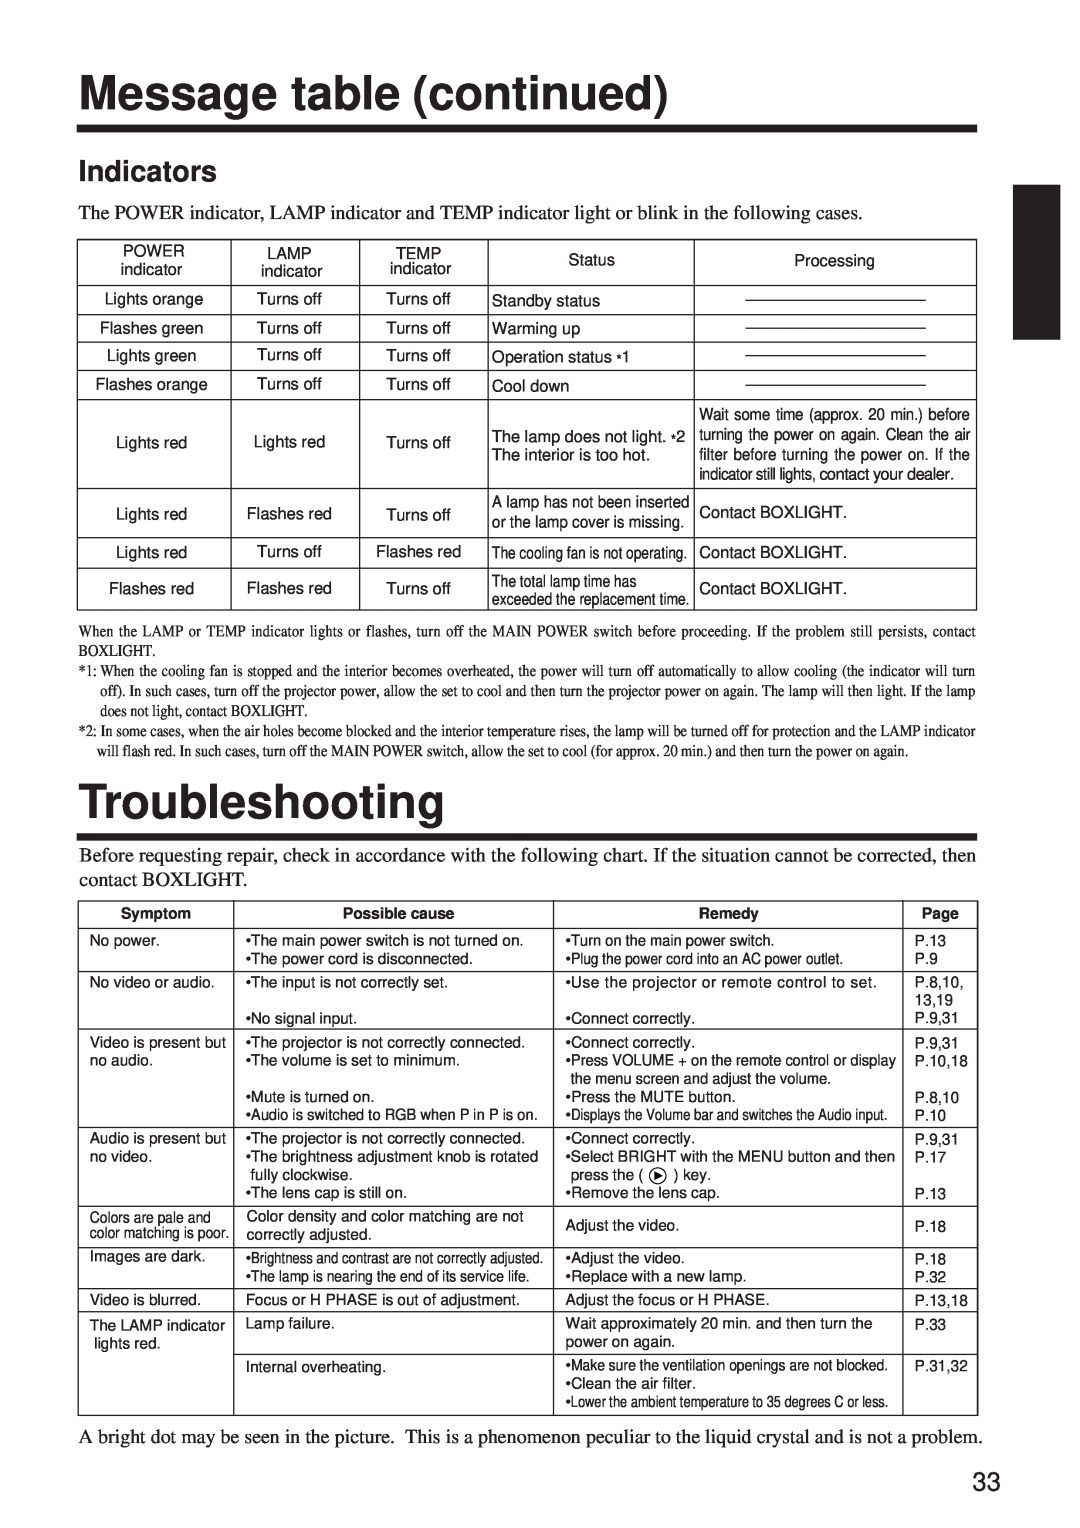 BOXLIGHT MP-650i user manual Message table continued, Troubleshooting, Indicators 